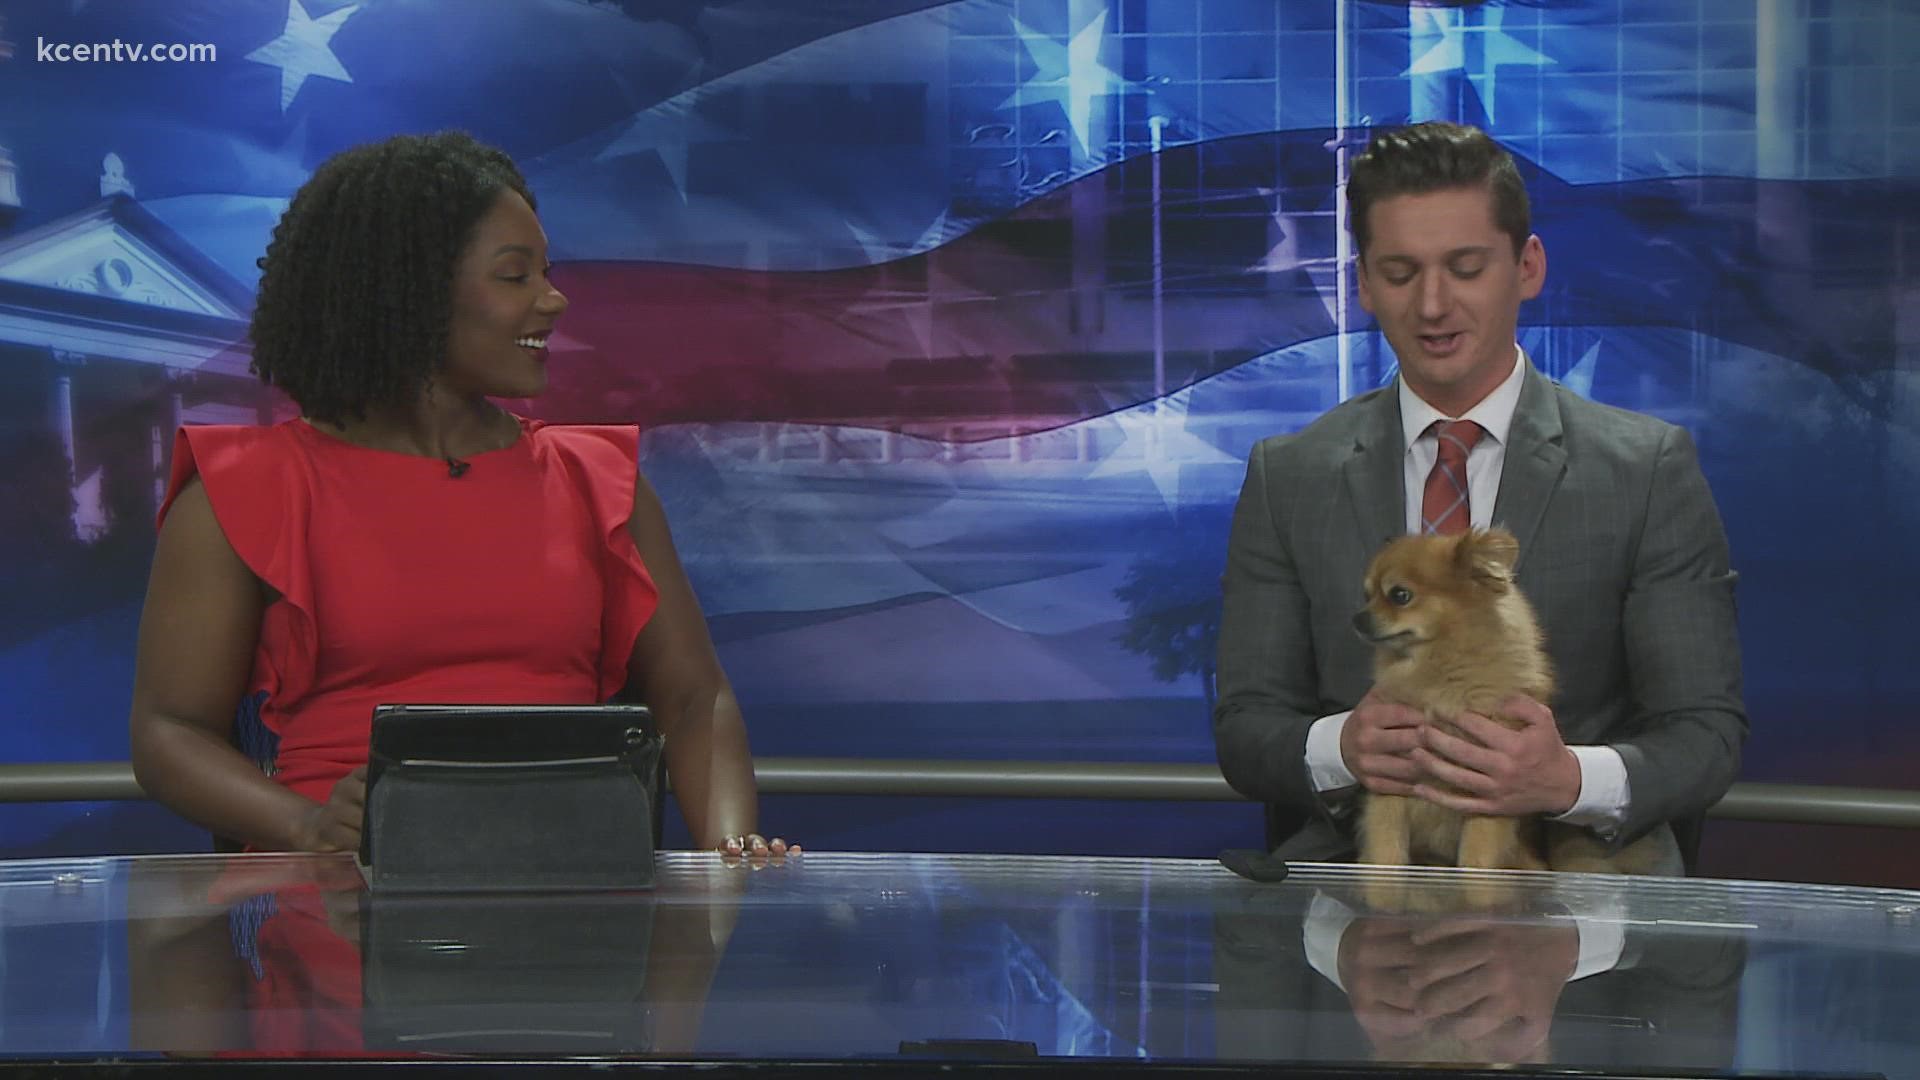 Texas Today crew sings the latest trending "Who Said This" and are joined by a cute furry friend on set.